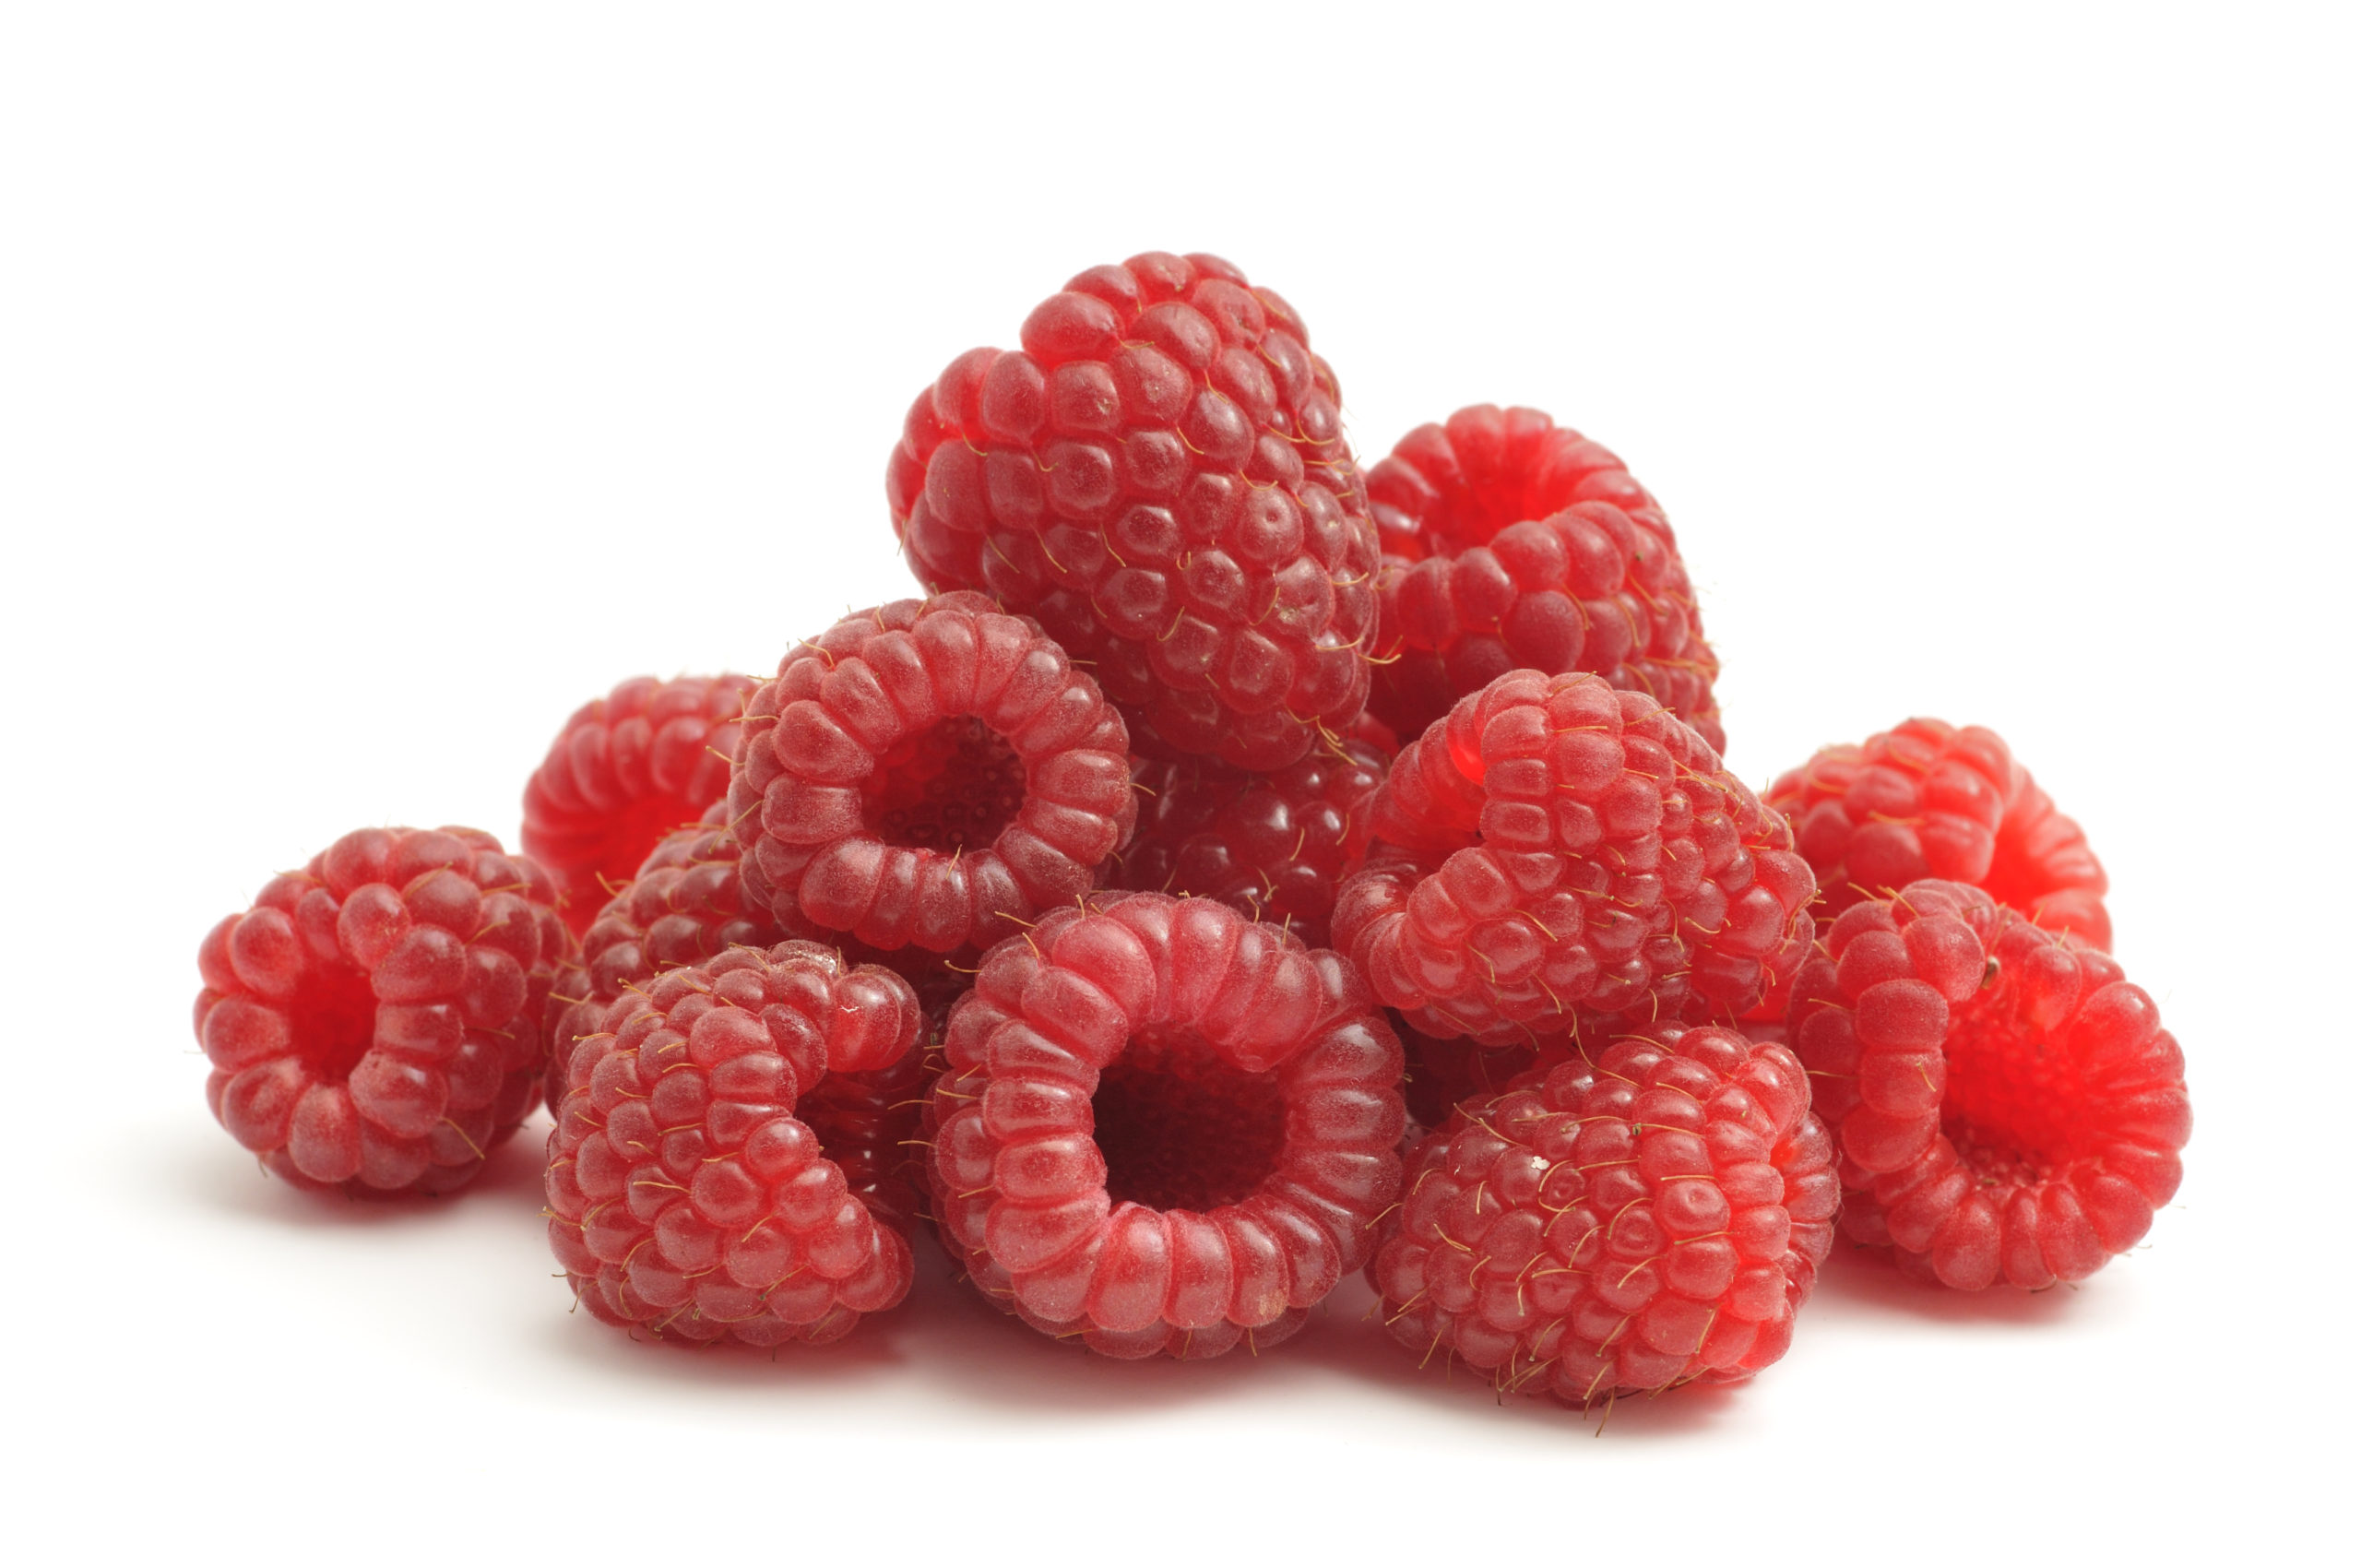 Isolated Image of Raspberries | Fruits for Weight Loss